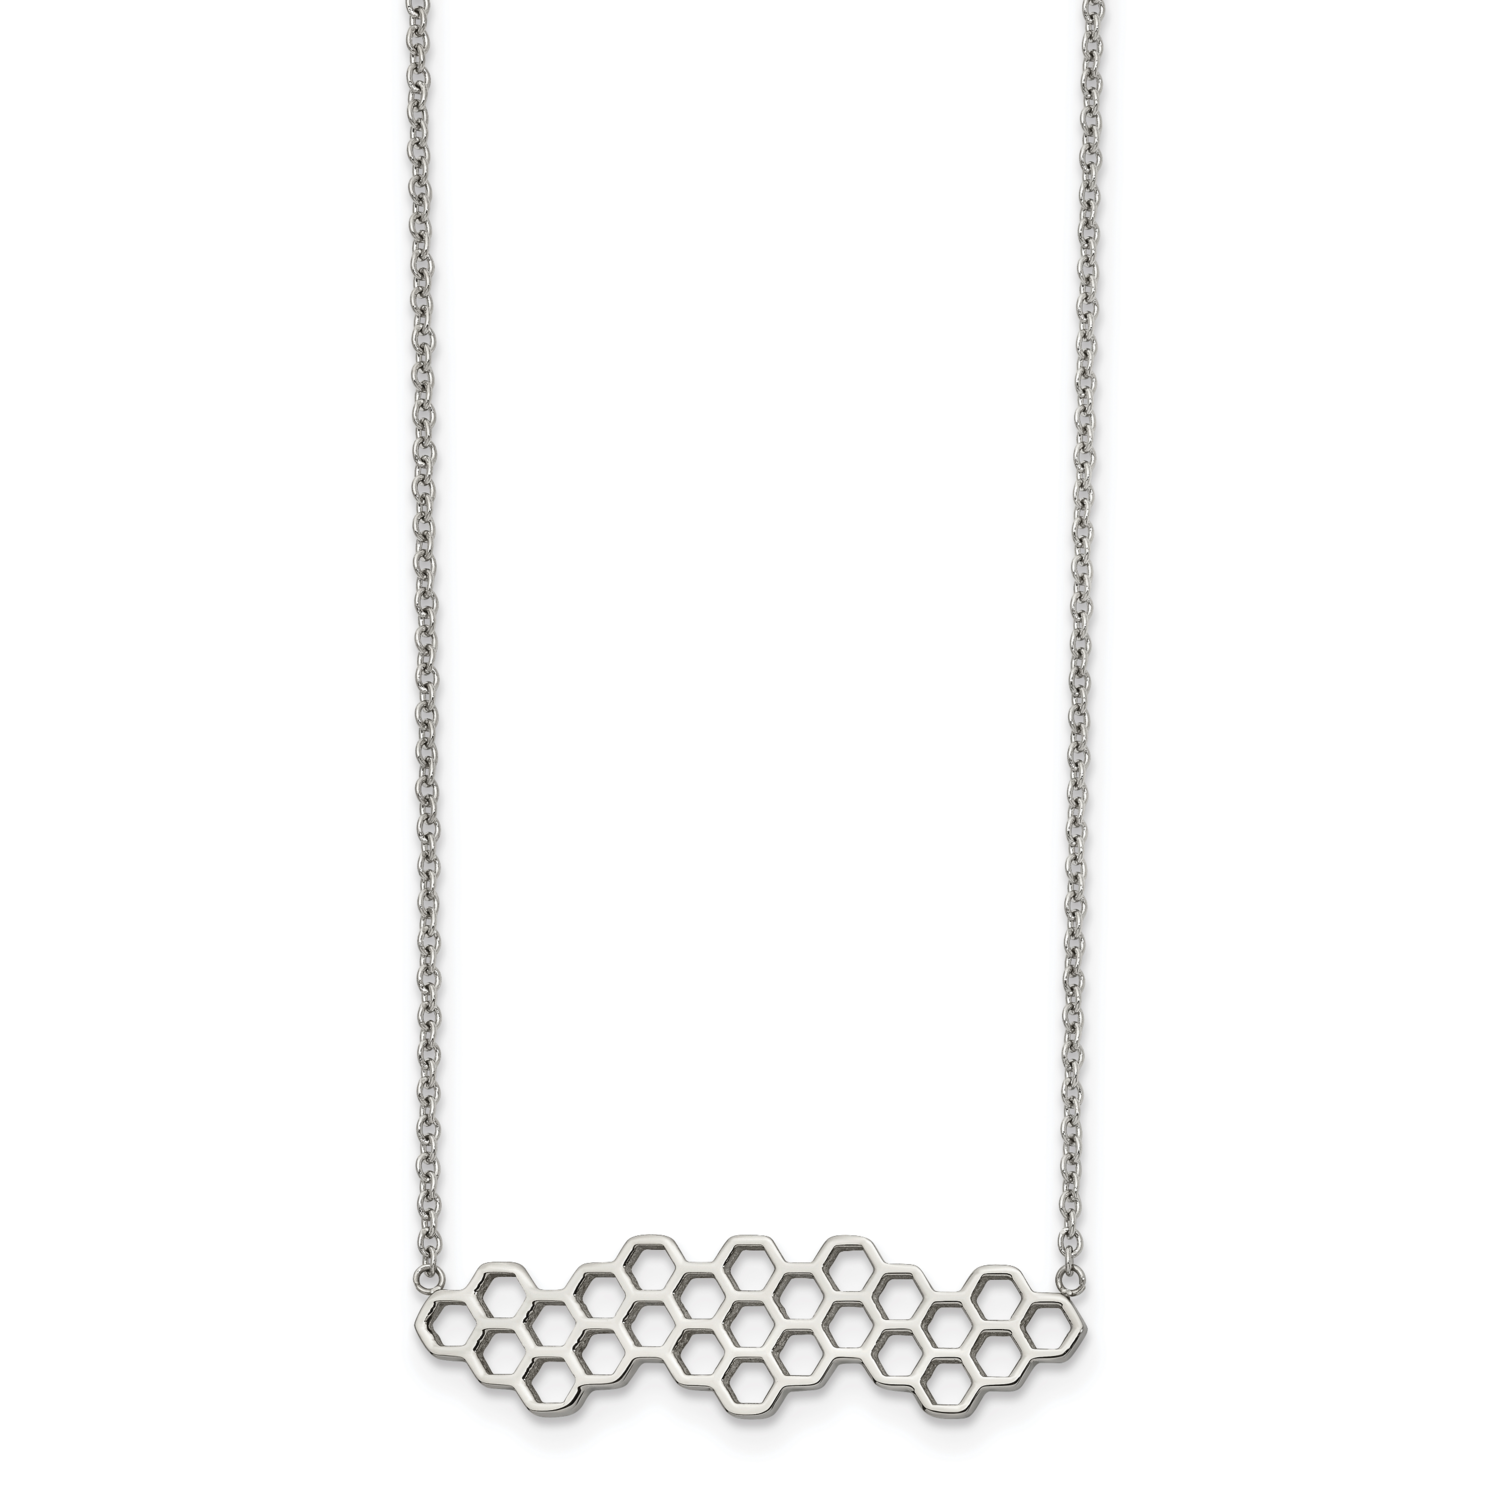 Honeycomb 17.75 Inch with 1.25 Inch Extension Necklace Stainless Steel Polished SRN2536-17.75